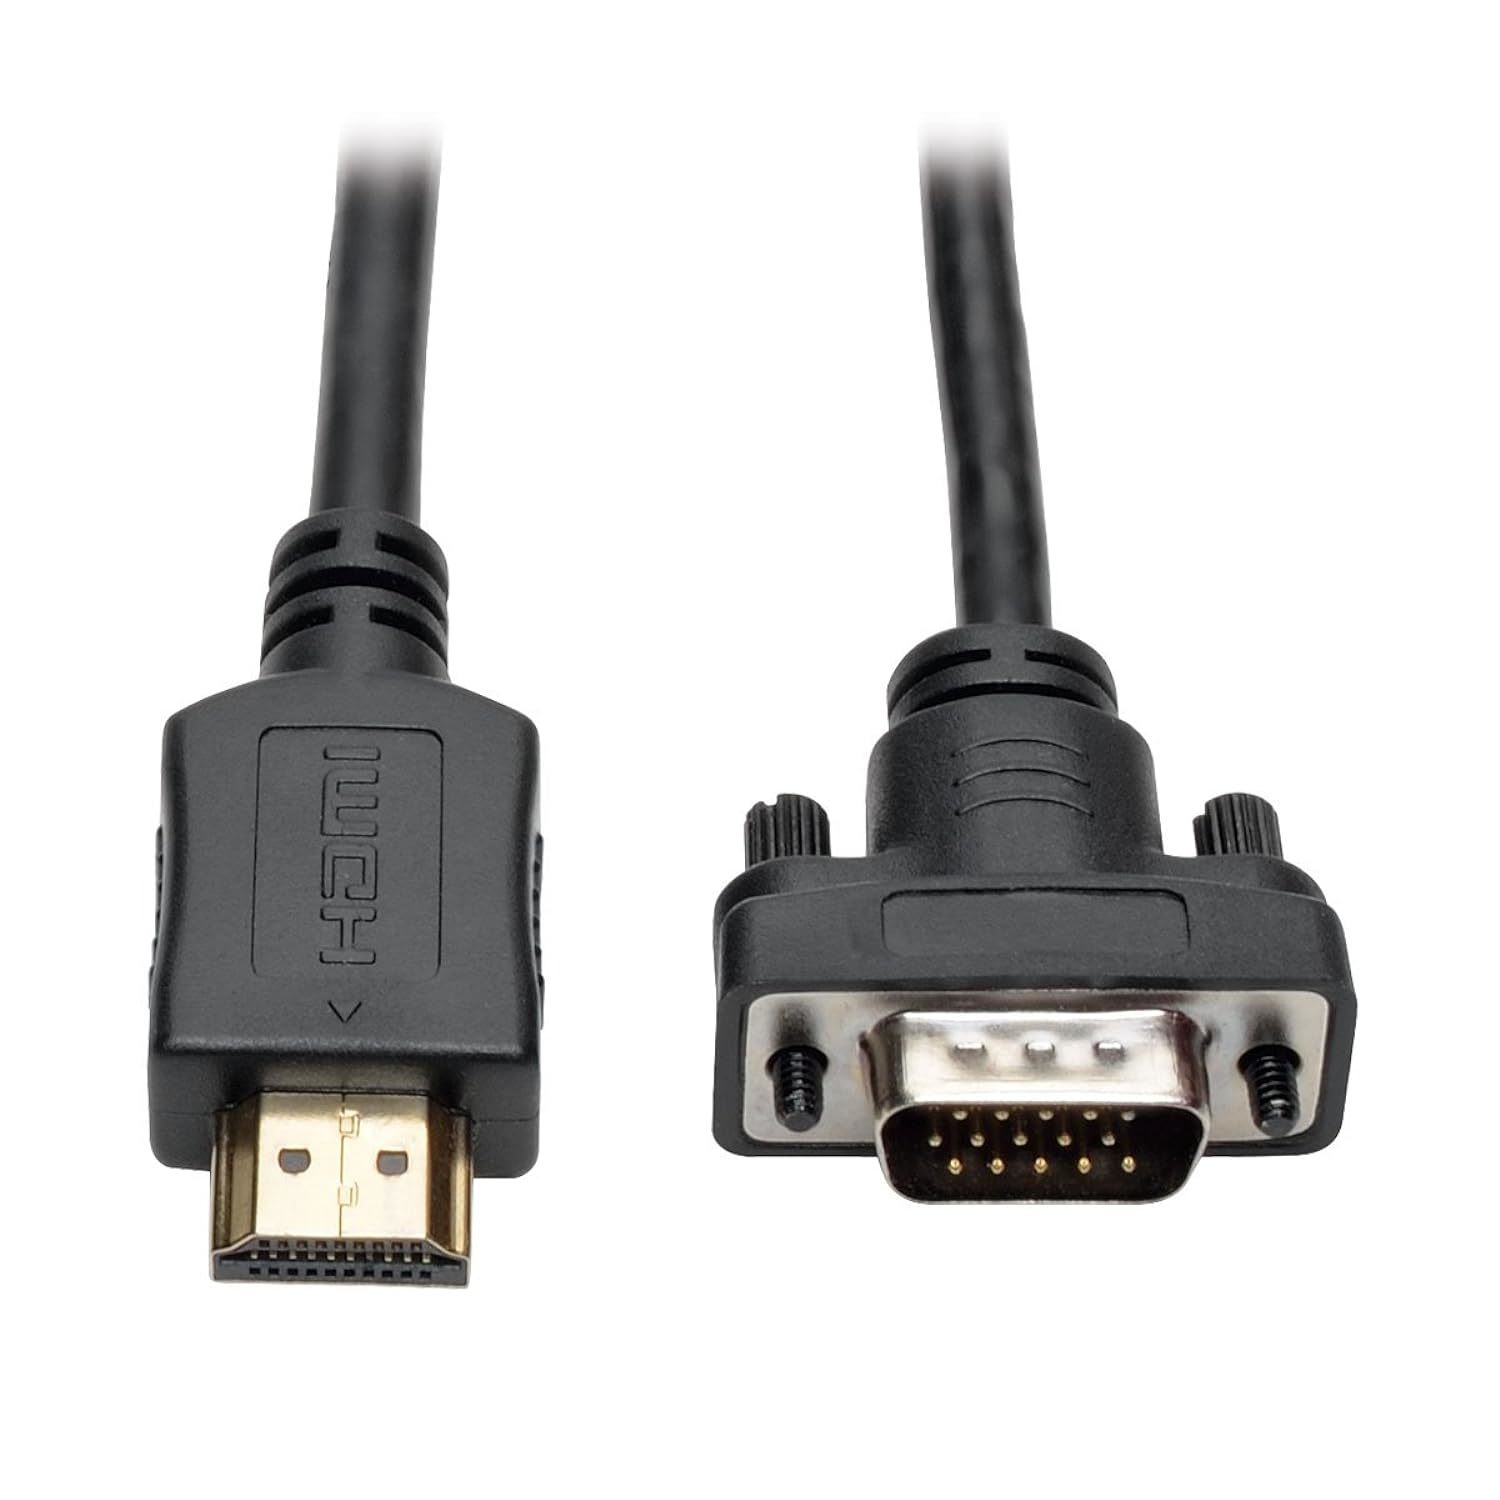 Tripp Lite HDMI to VGA Active Adapter Converter Cable, Low Profile, Male-to-Male - $54.99